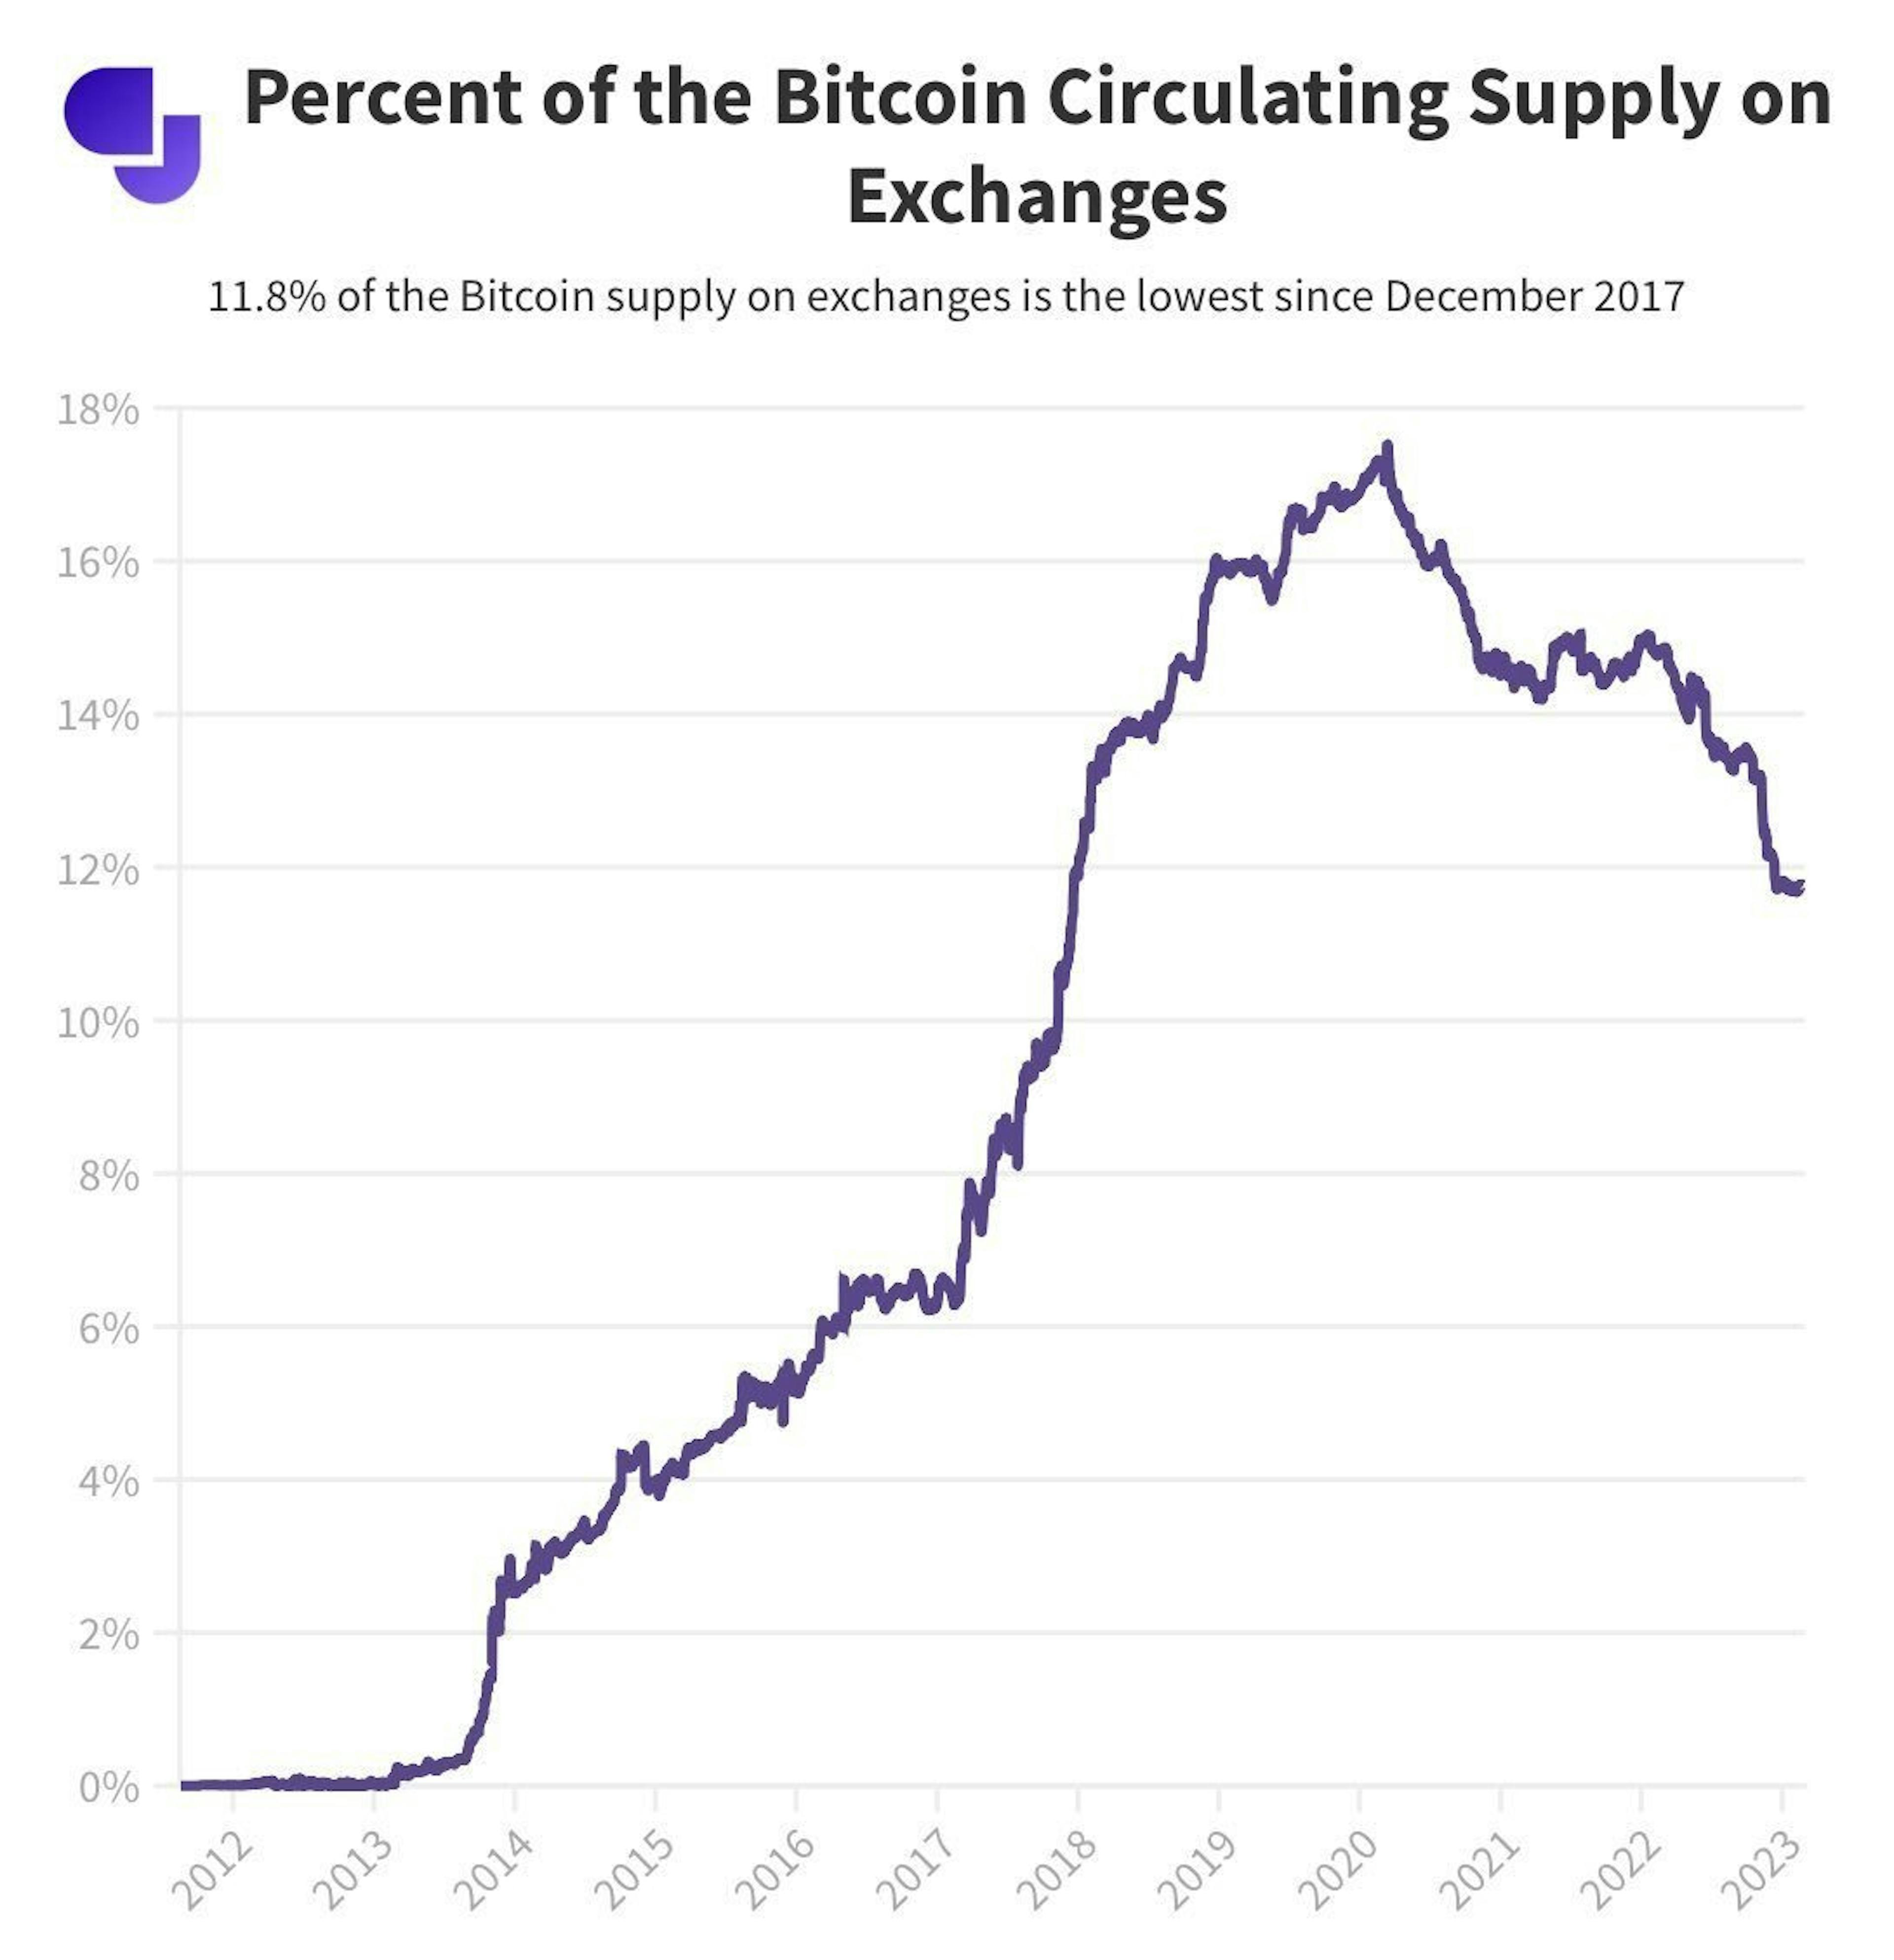 Percent of the Bitcoin circulating supply on exchanges